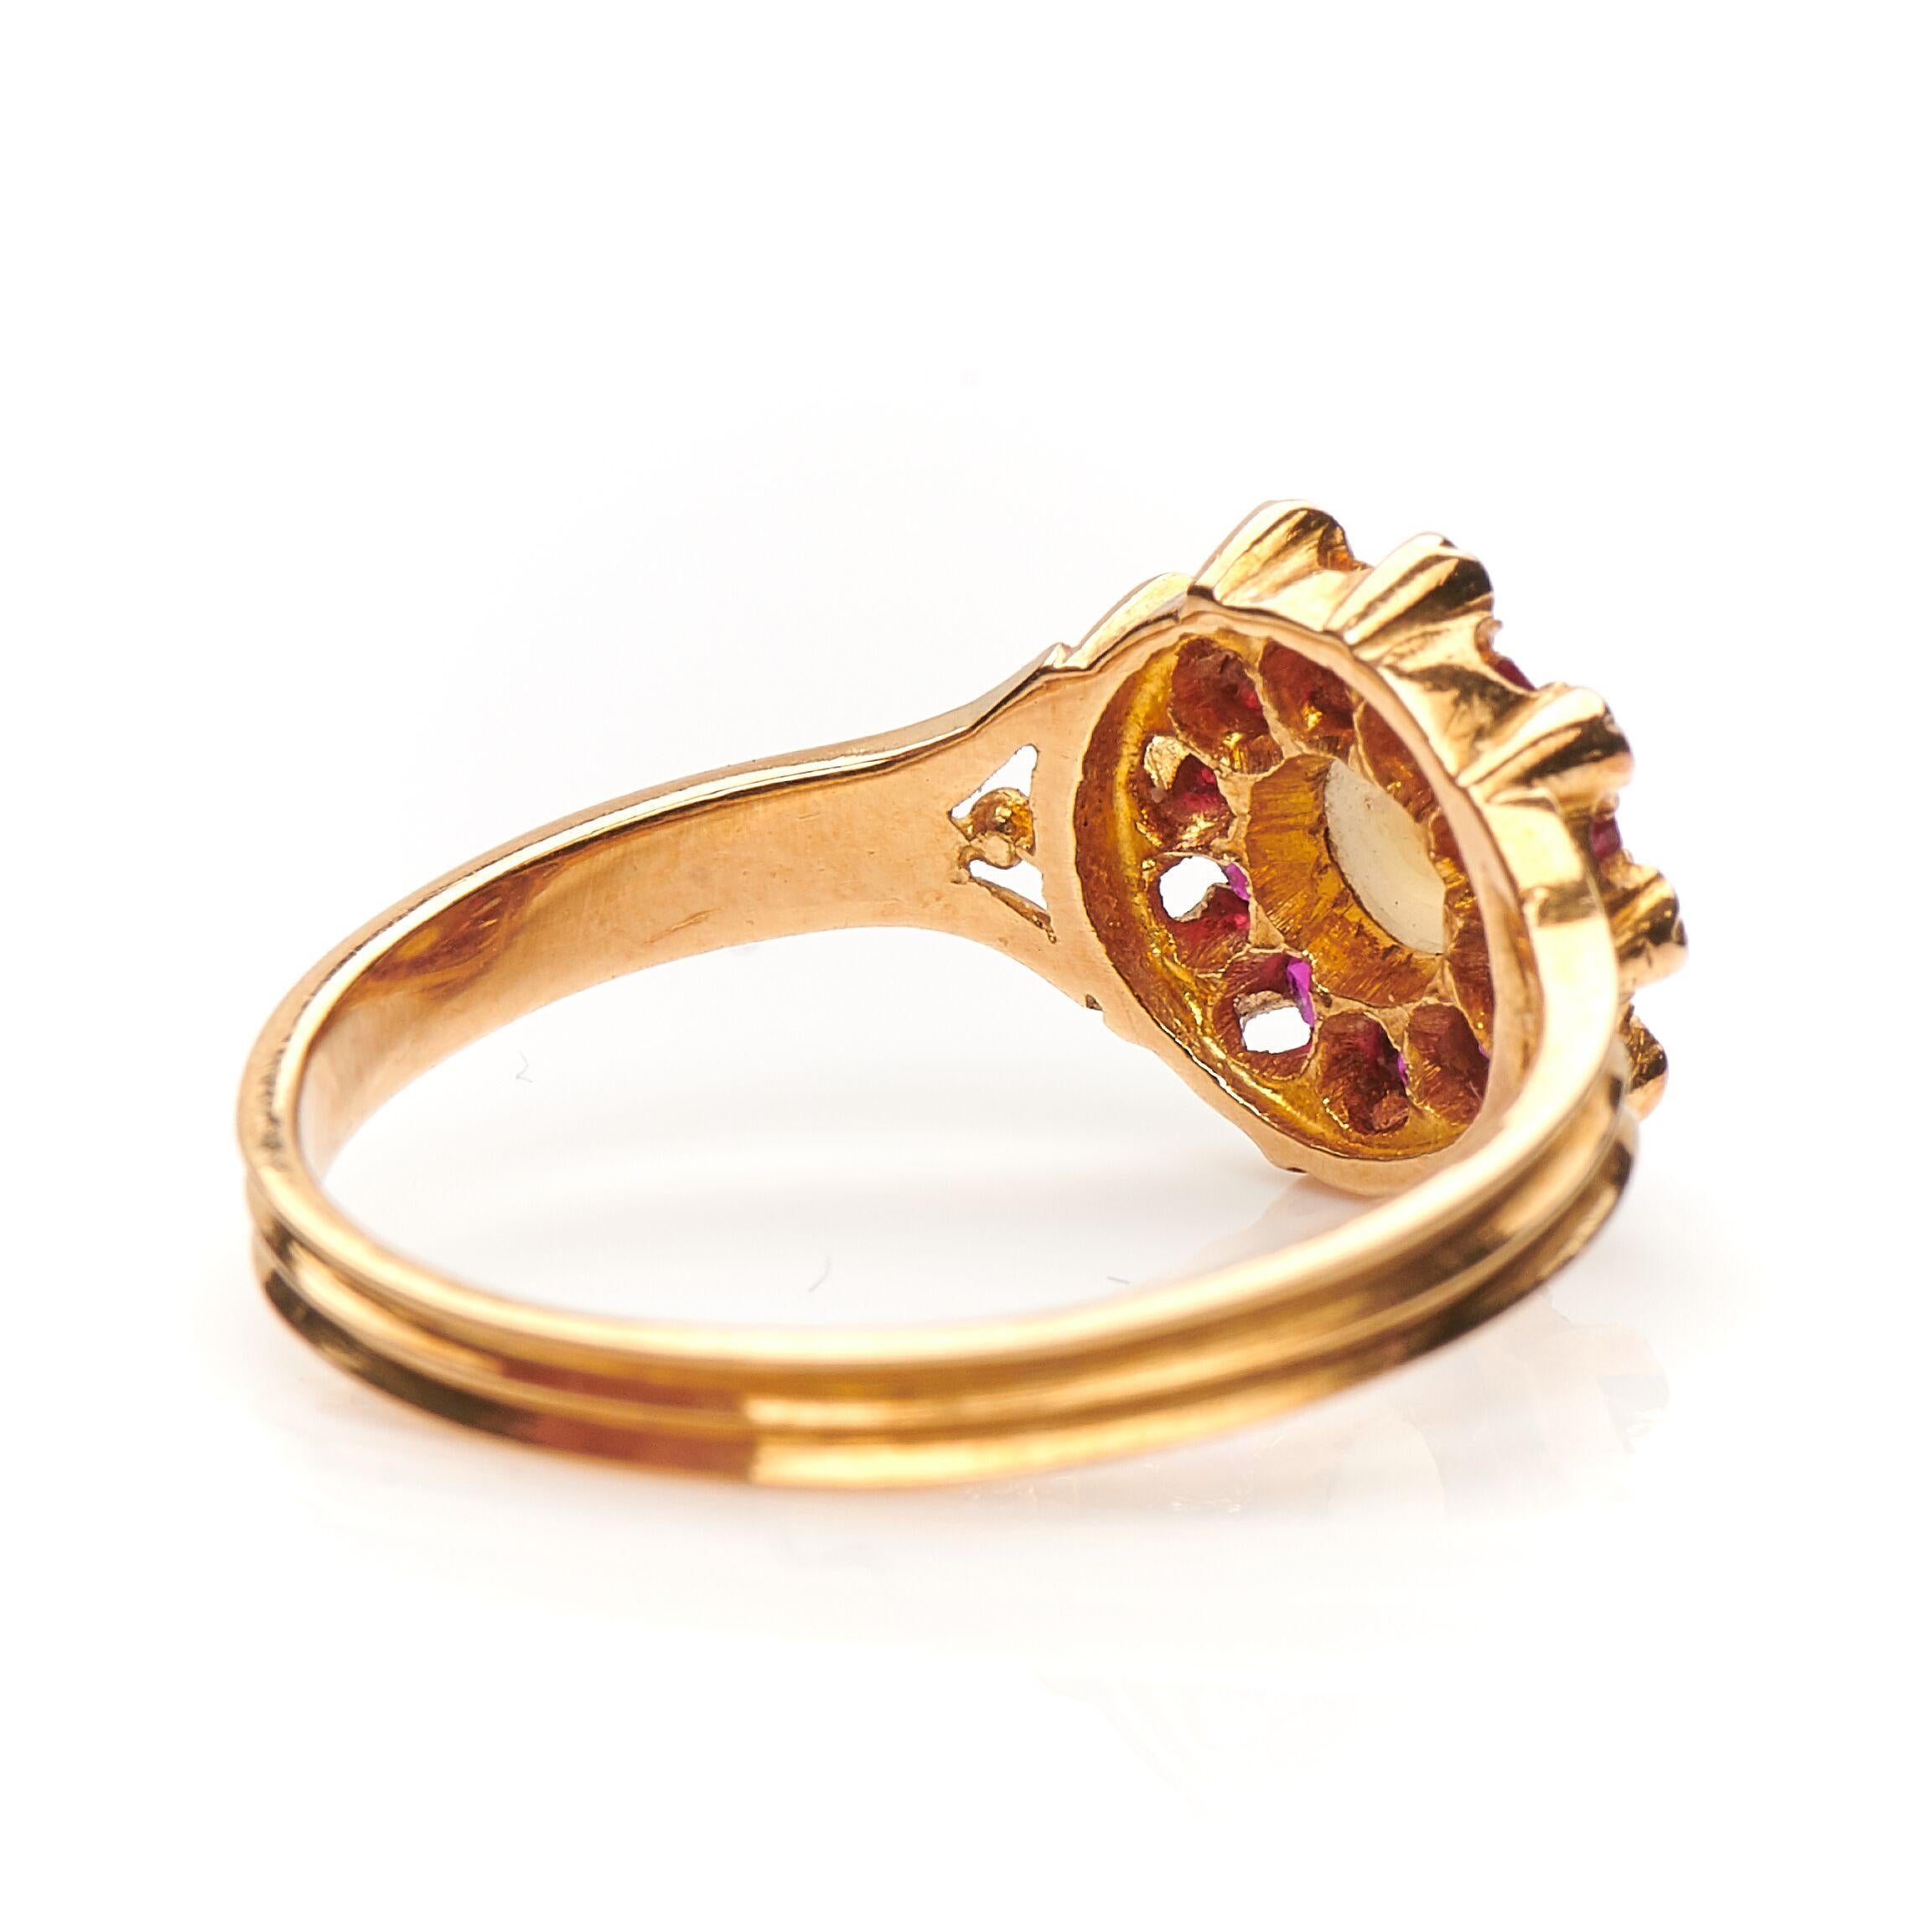 Old European Cut Antique, Edwardian, 18 Carat Yellow Gold, Ruby, Diamond and Pearl Cluster Ring